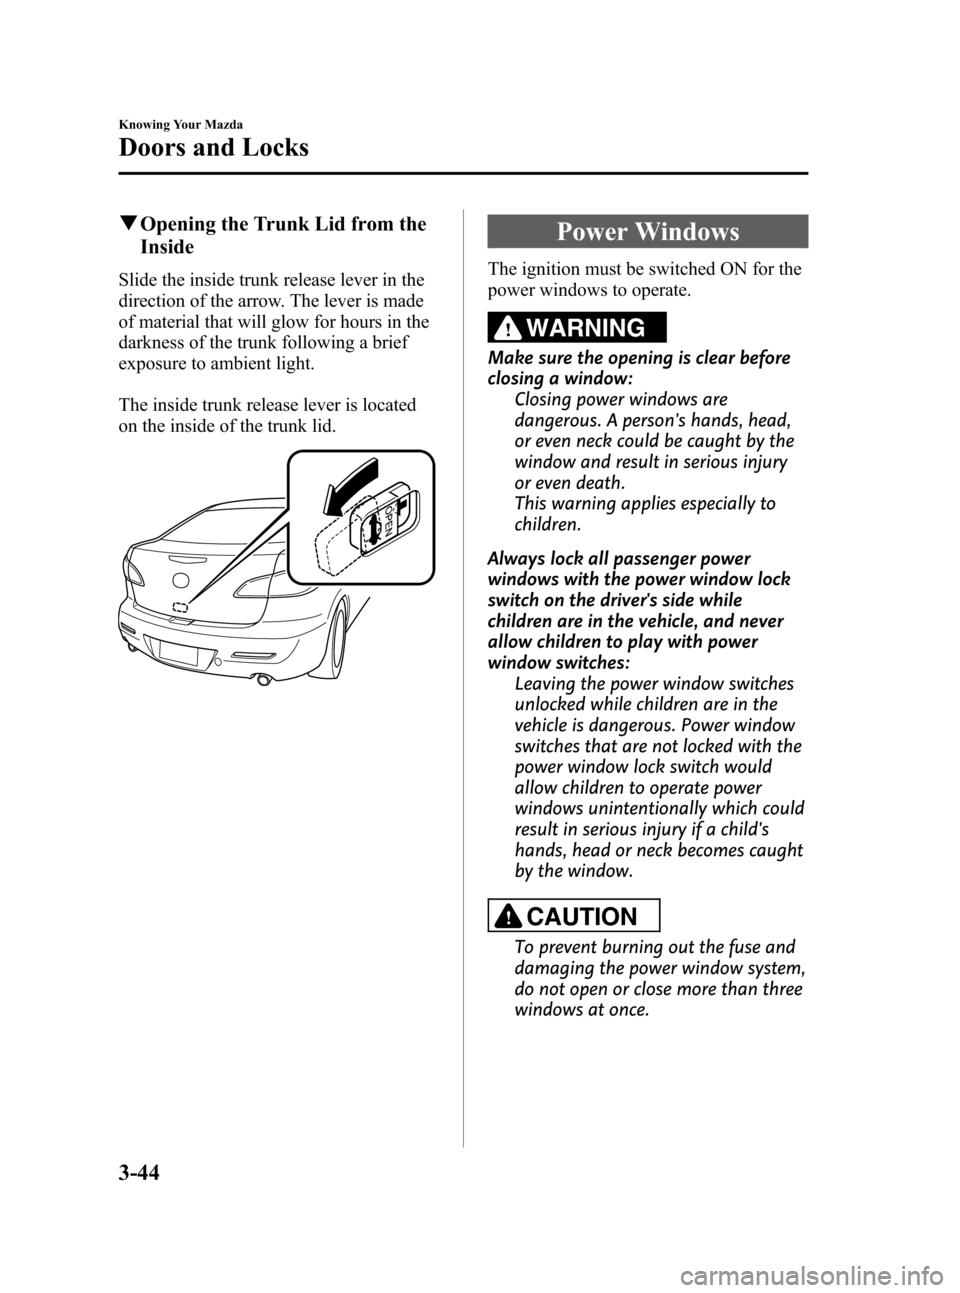 MAZDA MODEL 3 HATCHBACK 2011  Owners Manual (in English) Black plate (120,1)
qOpening the Trunk Lid from the
Inside
Slide the inside trunk release lever in the
direction of the arrow. The lever is made
of material that will glow for hours in the
darkness of